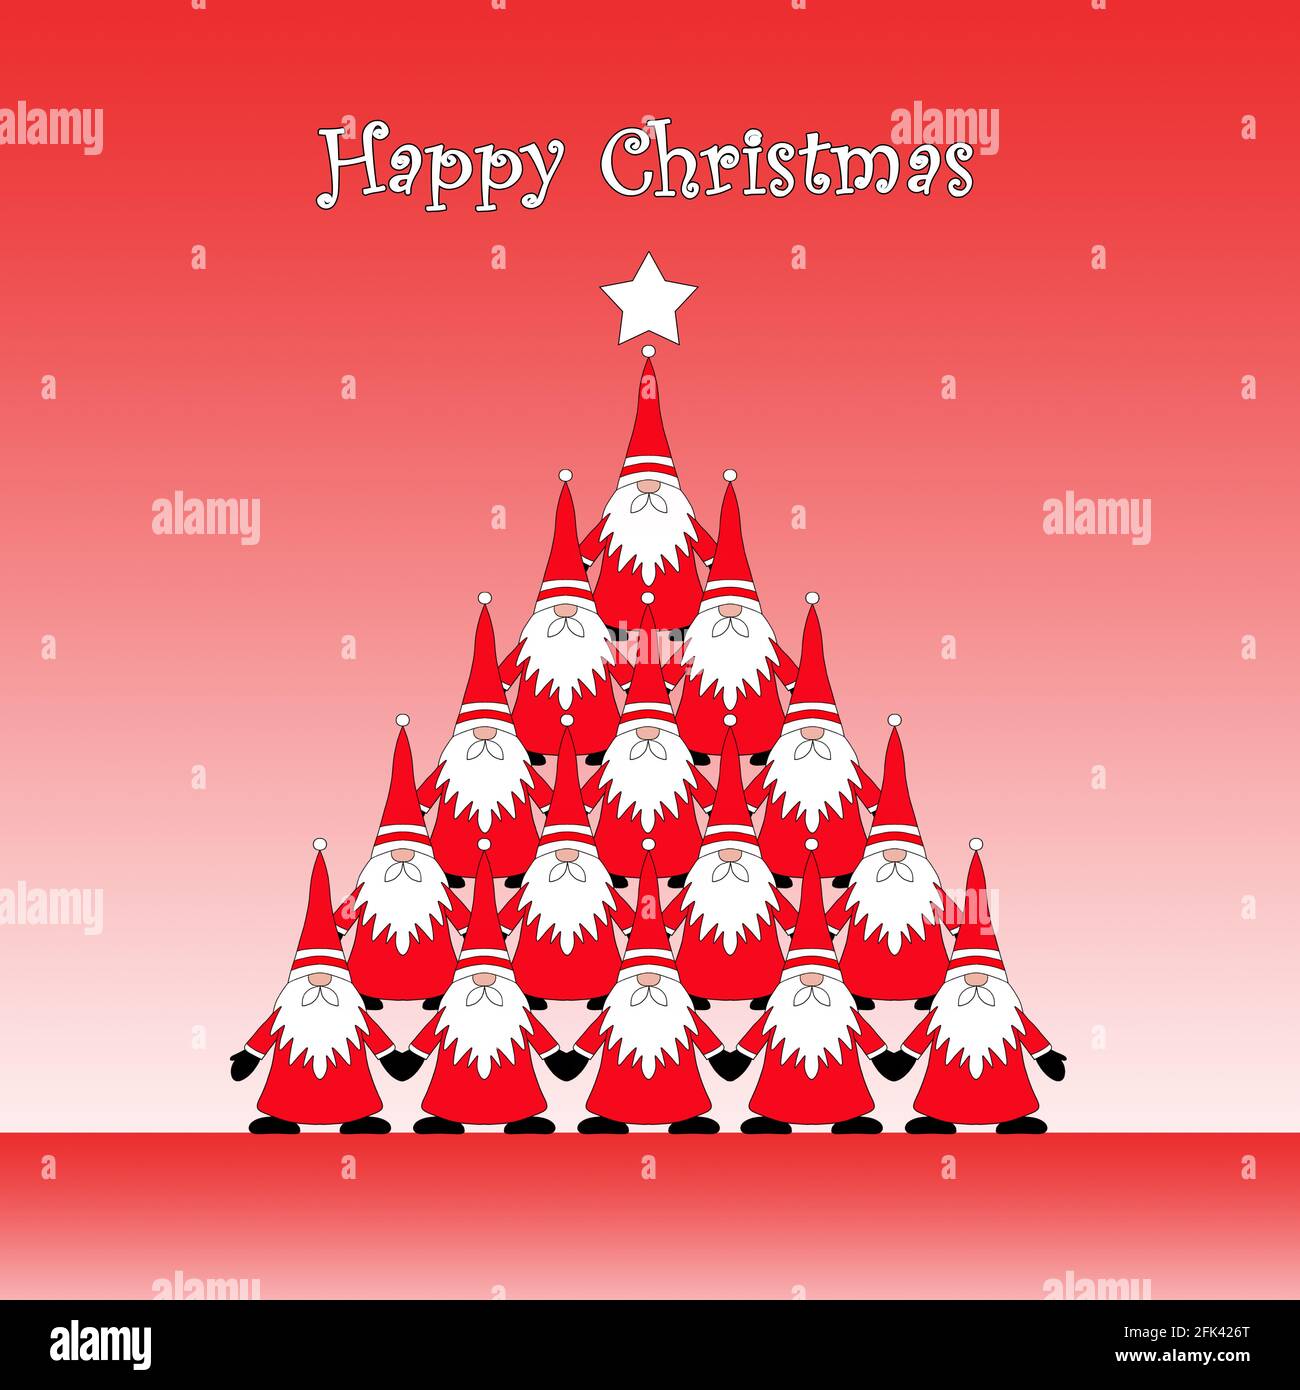 An illustration of cute gnome santas in the shape of a Christmas tree with the message Happy Christmas. Stock Photo